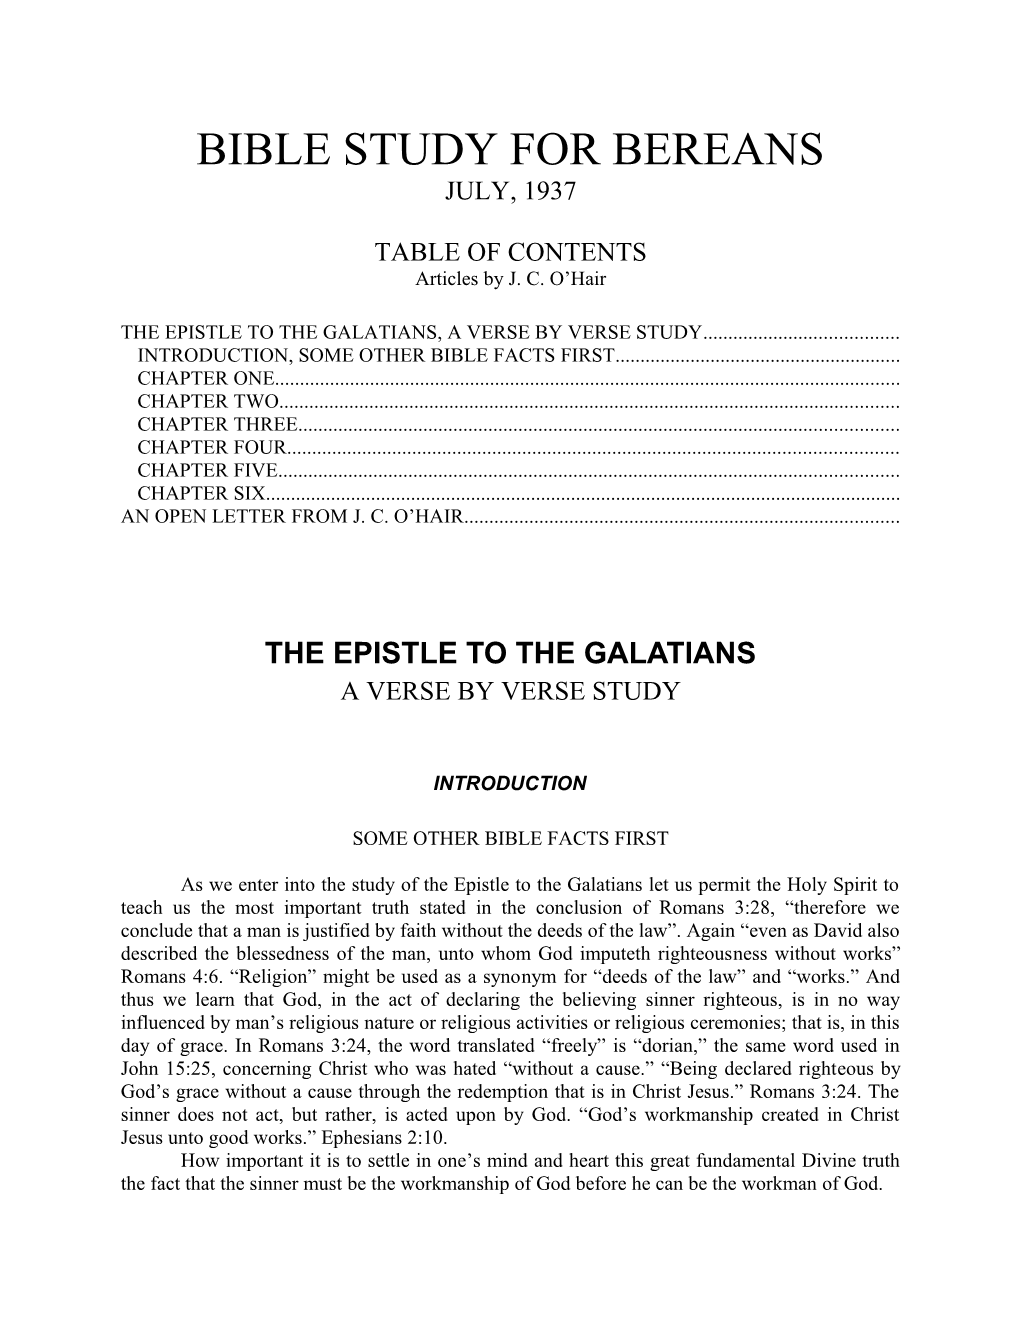 The Study of Galatians Some Other Bible Facts First